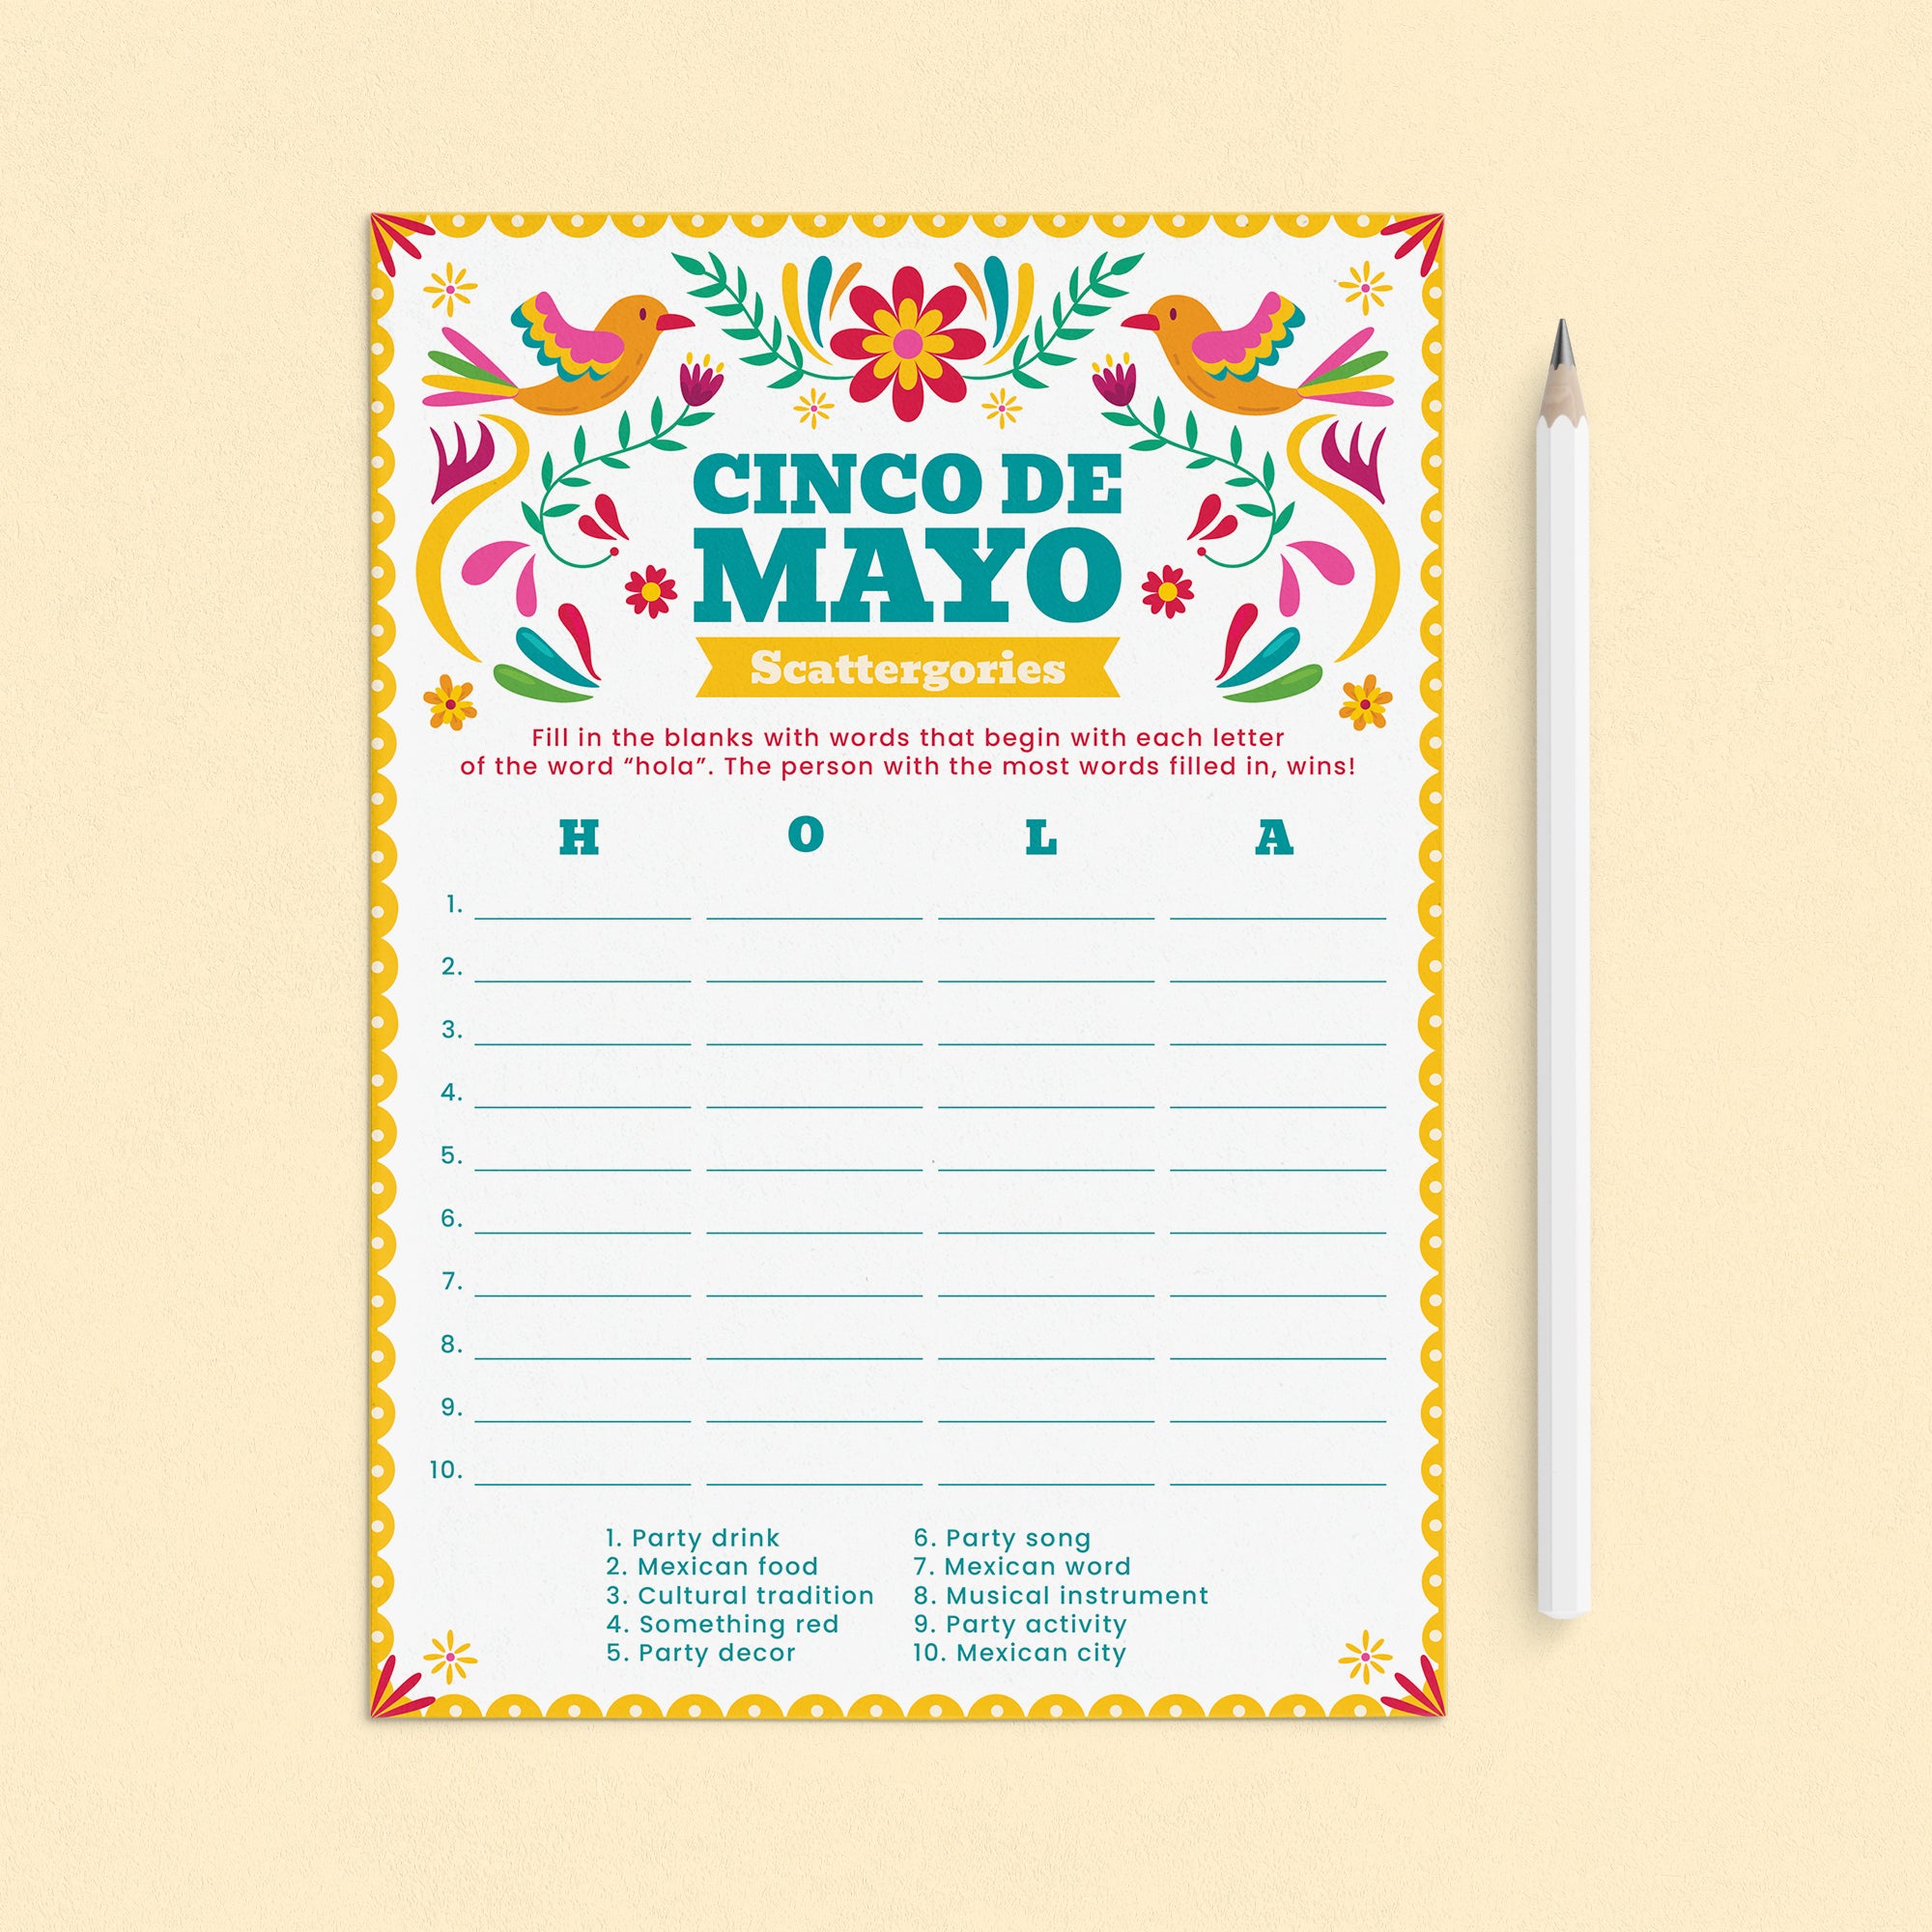 Cinco de Mayo Scattergories Party Game Printable by LittleSizzle